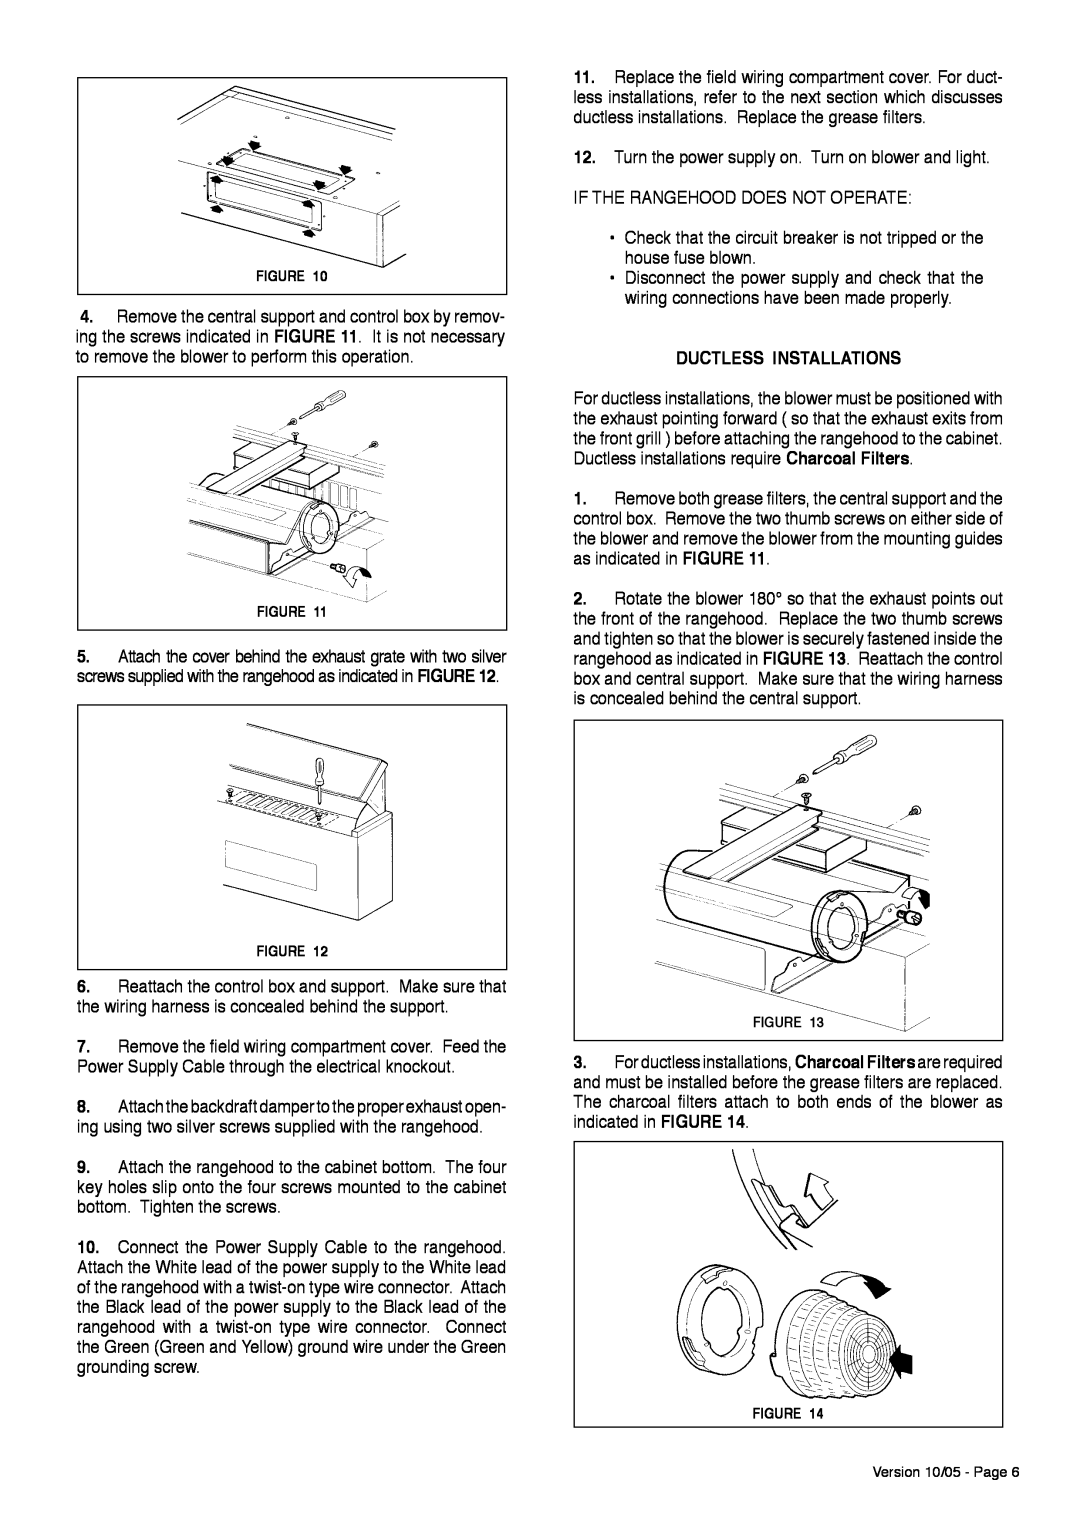 Faber Agio installation instructions Ductless Installations 